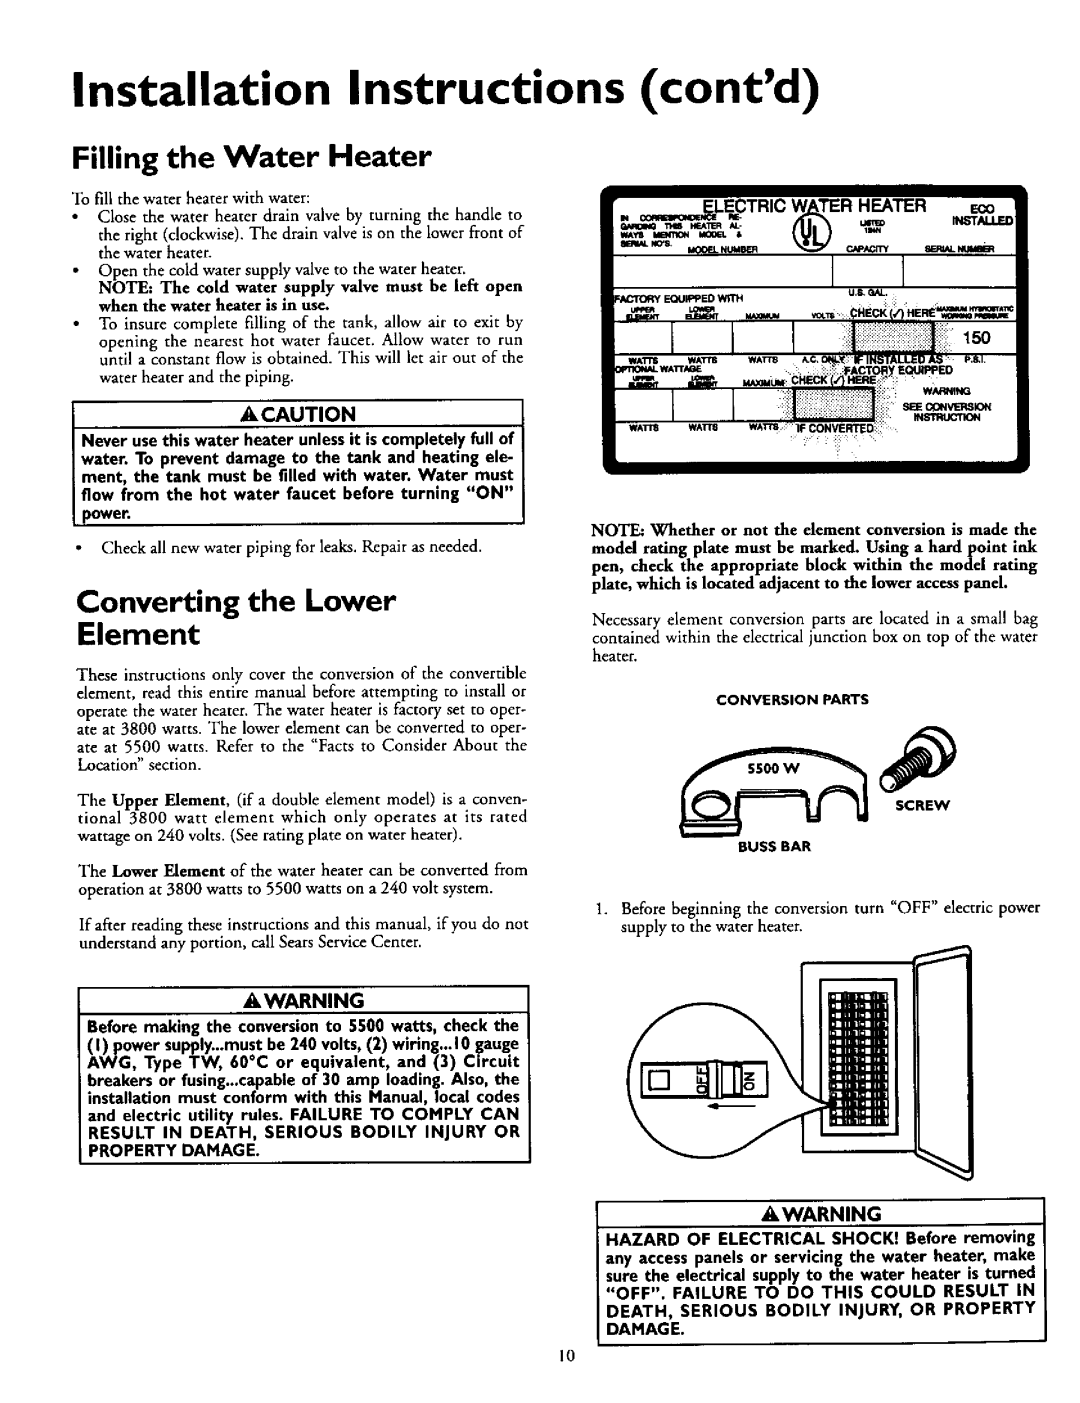 Kenmore 153.316253 Installation Instructions contd, Filling the Water Heater, Converting the Lower Element, Awarning 